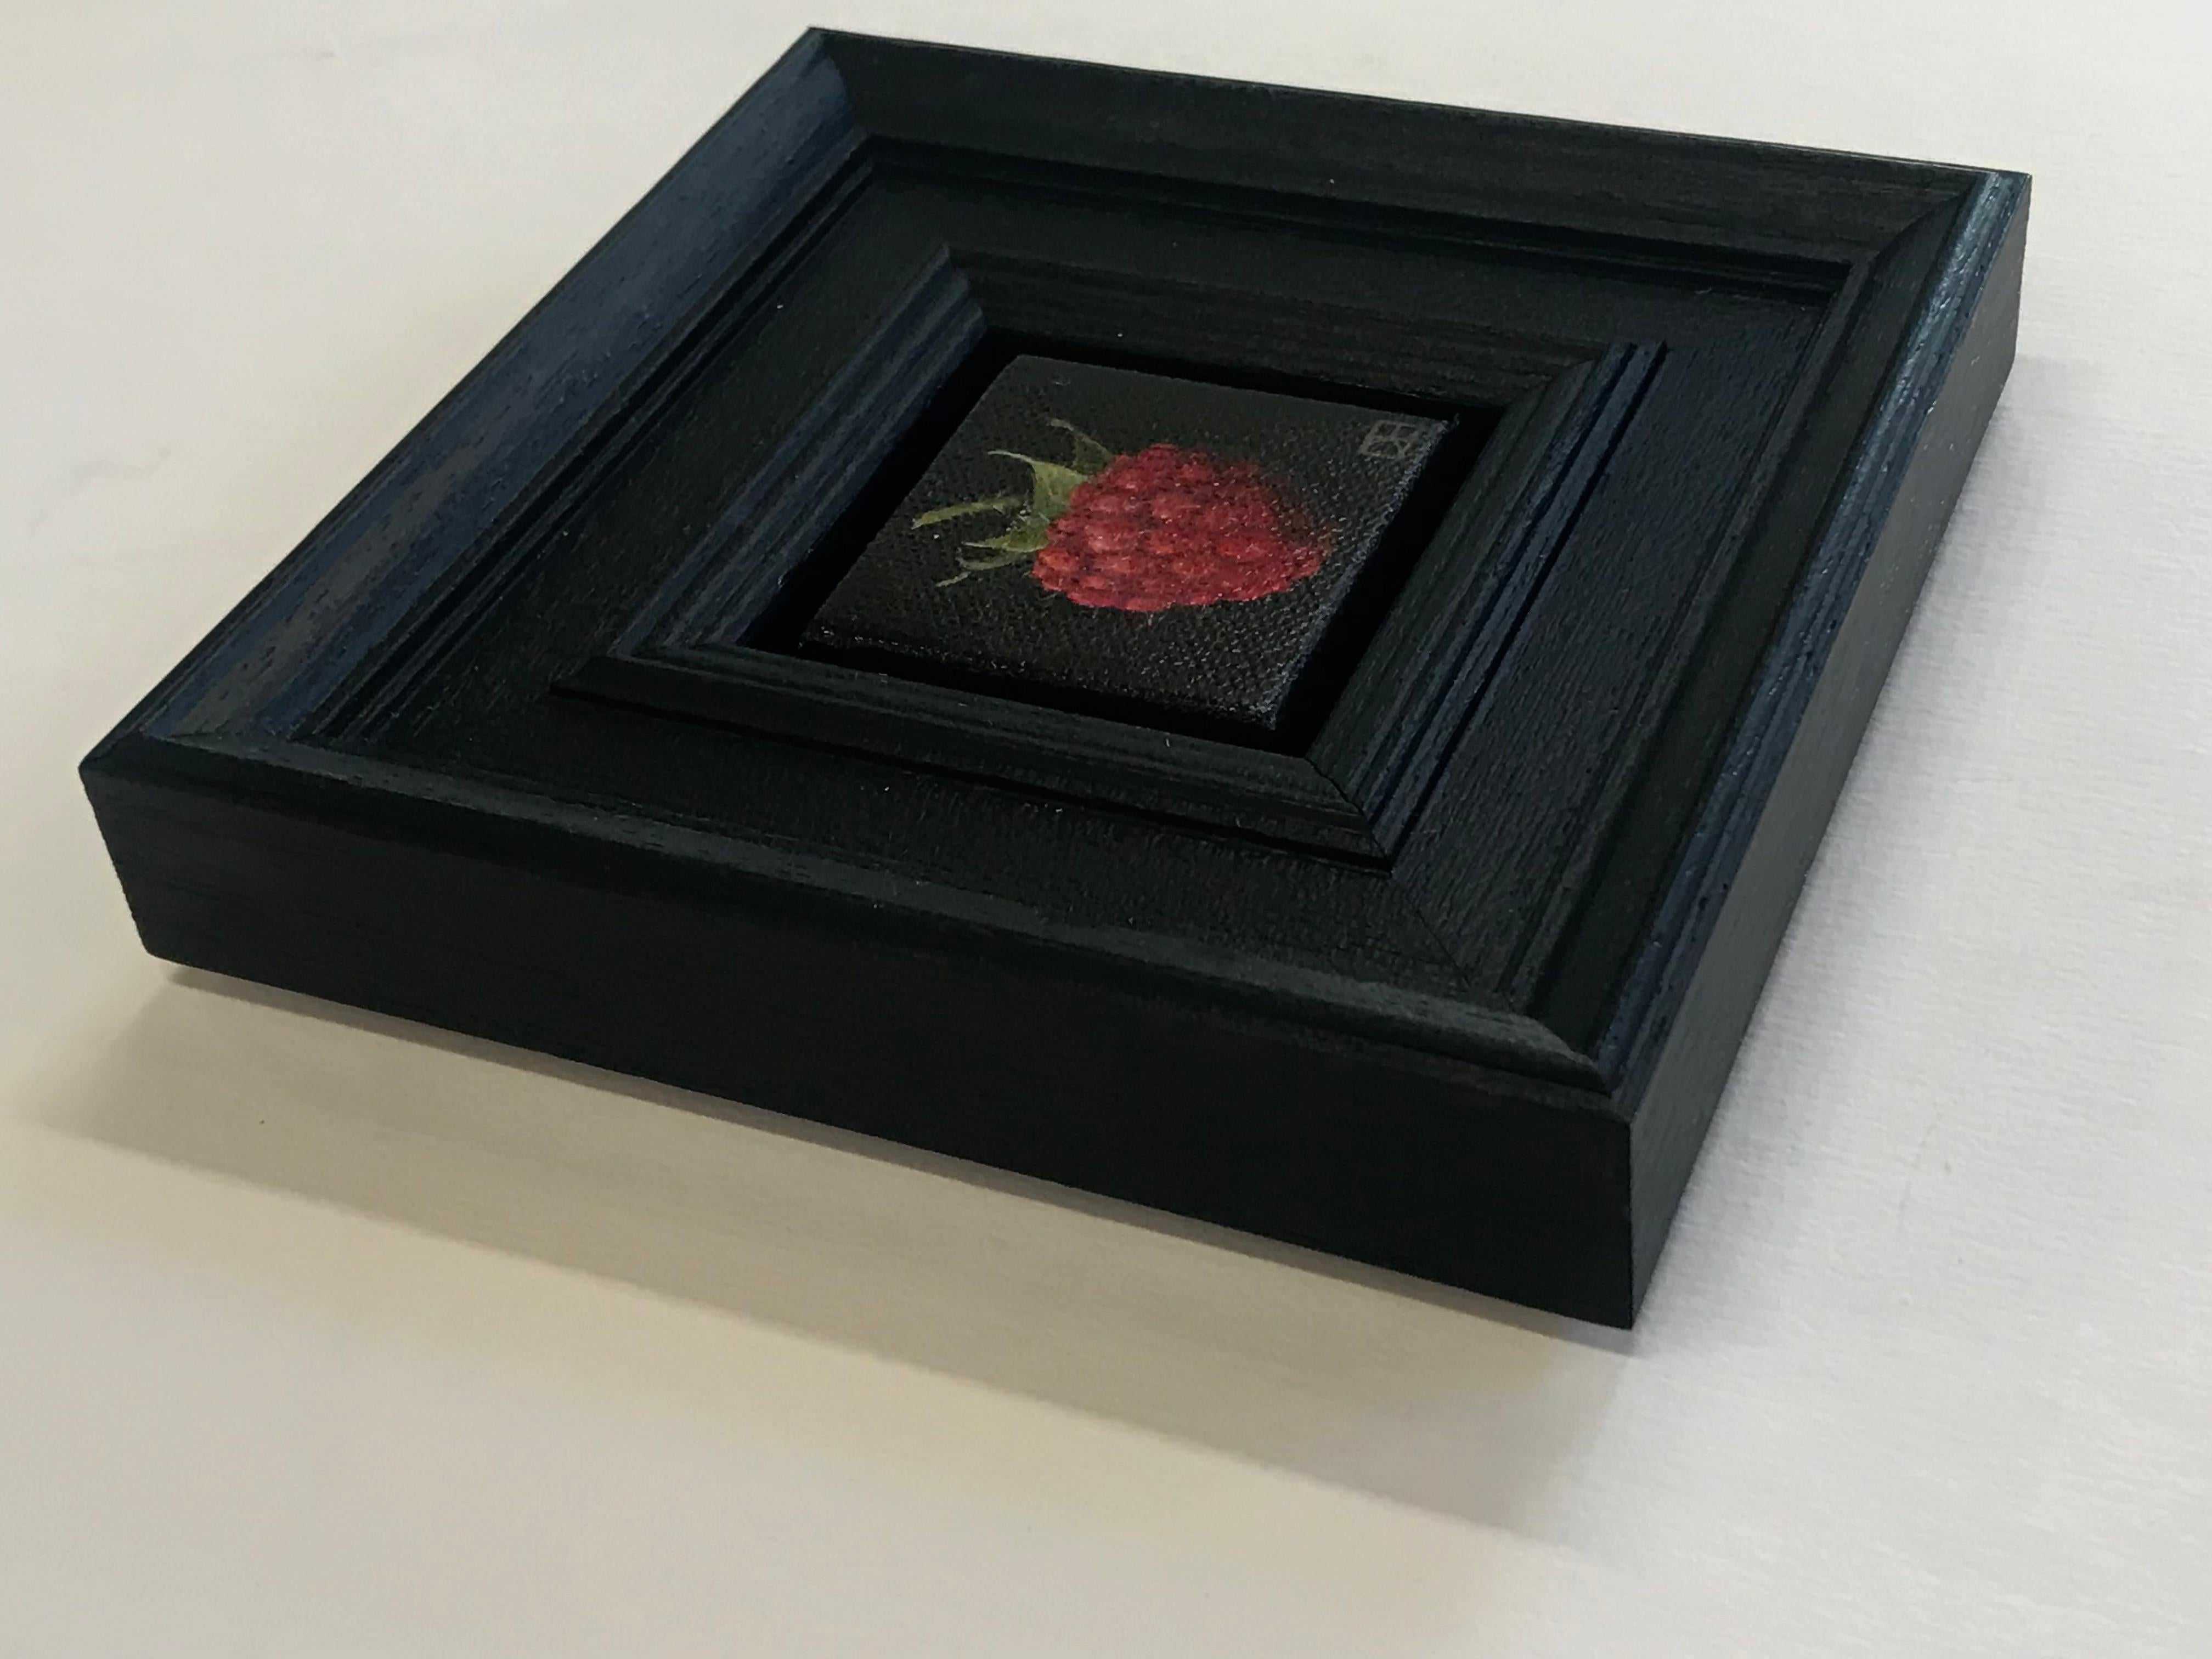 Pocket Raspberry is an original oil painting by Dani Humberstone as part of her Pocket Painting series featuring small scale realistic oil paintings, with a nod to baroque still life painting. The paintings are set in a black wood layered